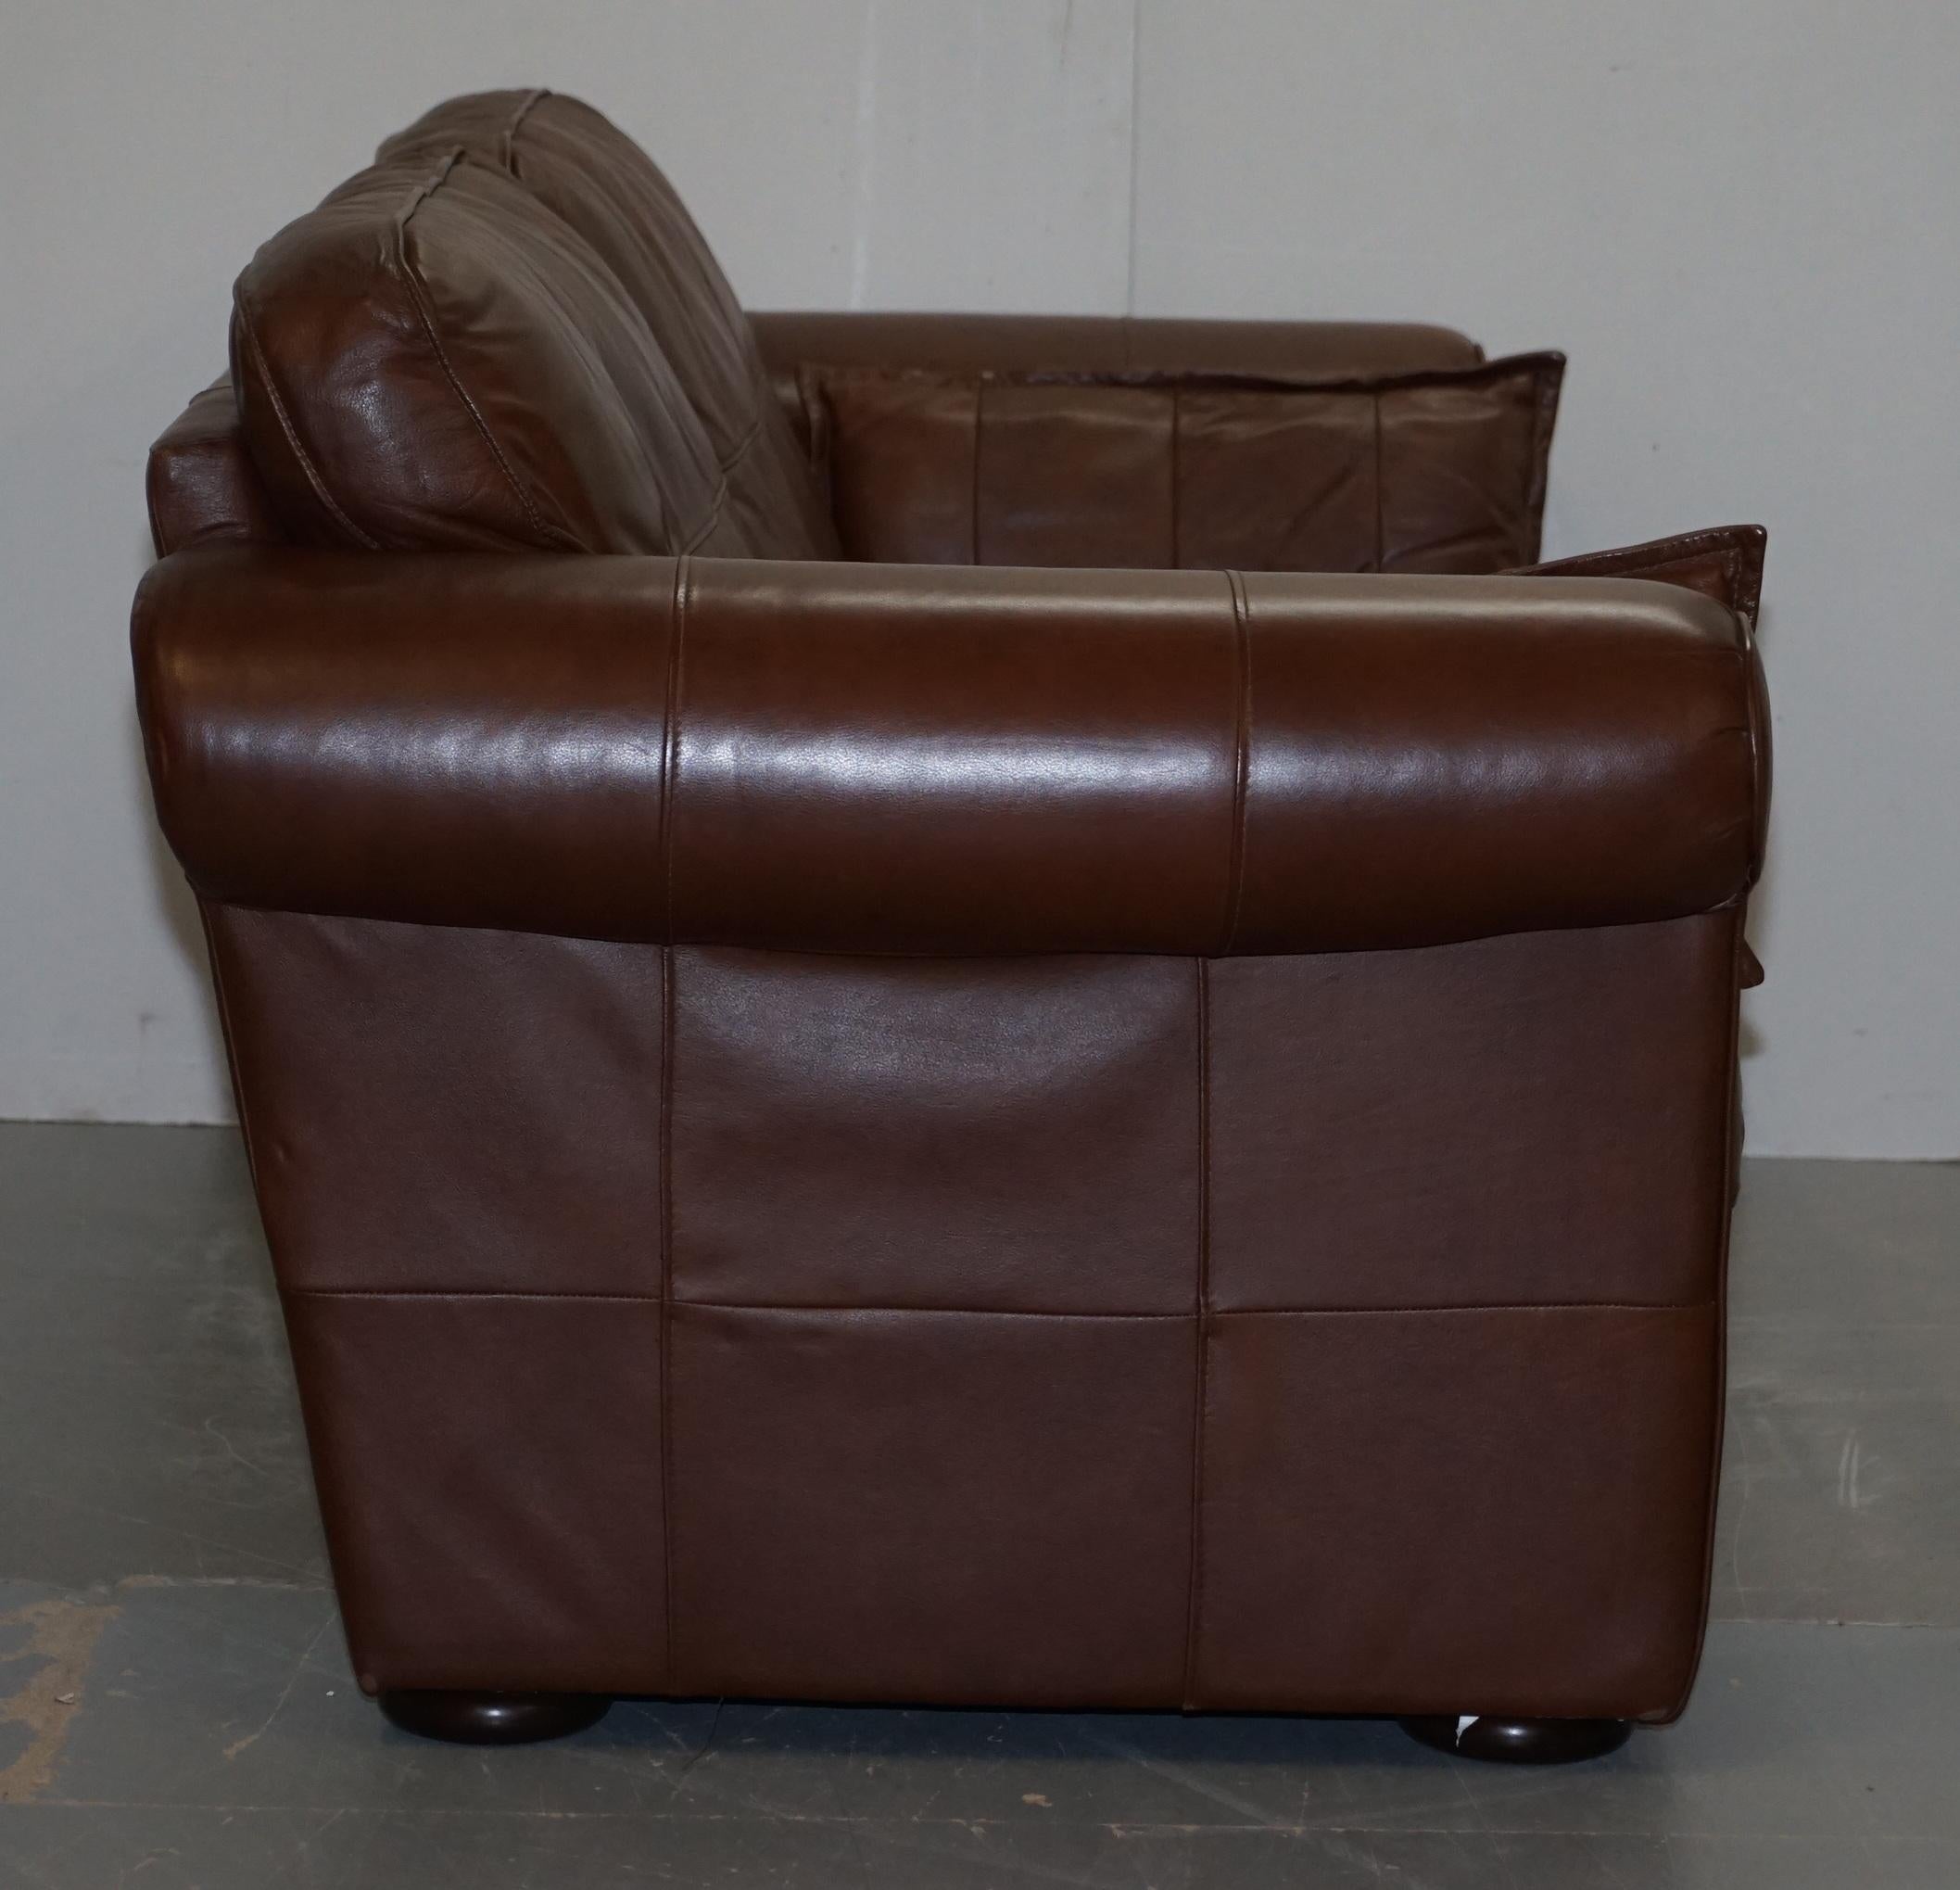 Contemporary Brown Leather Large Comfortable Three Seat Sofa Part of Large Suite 6